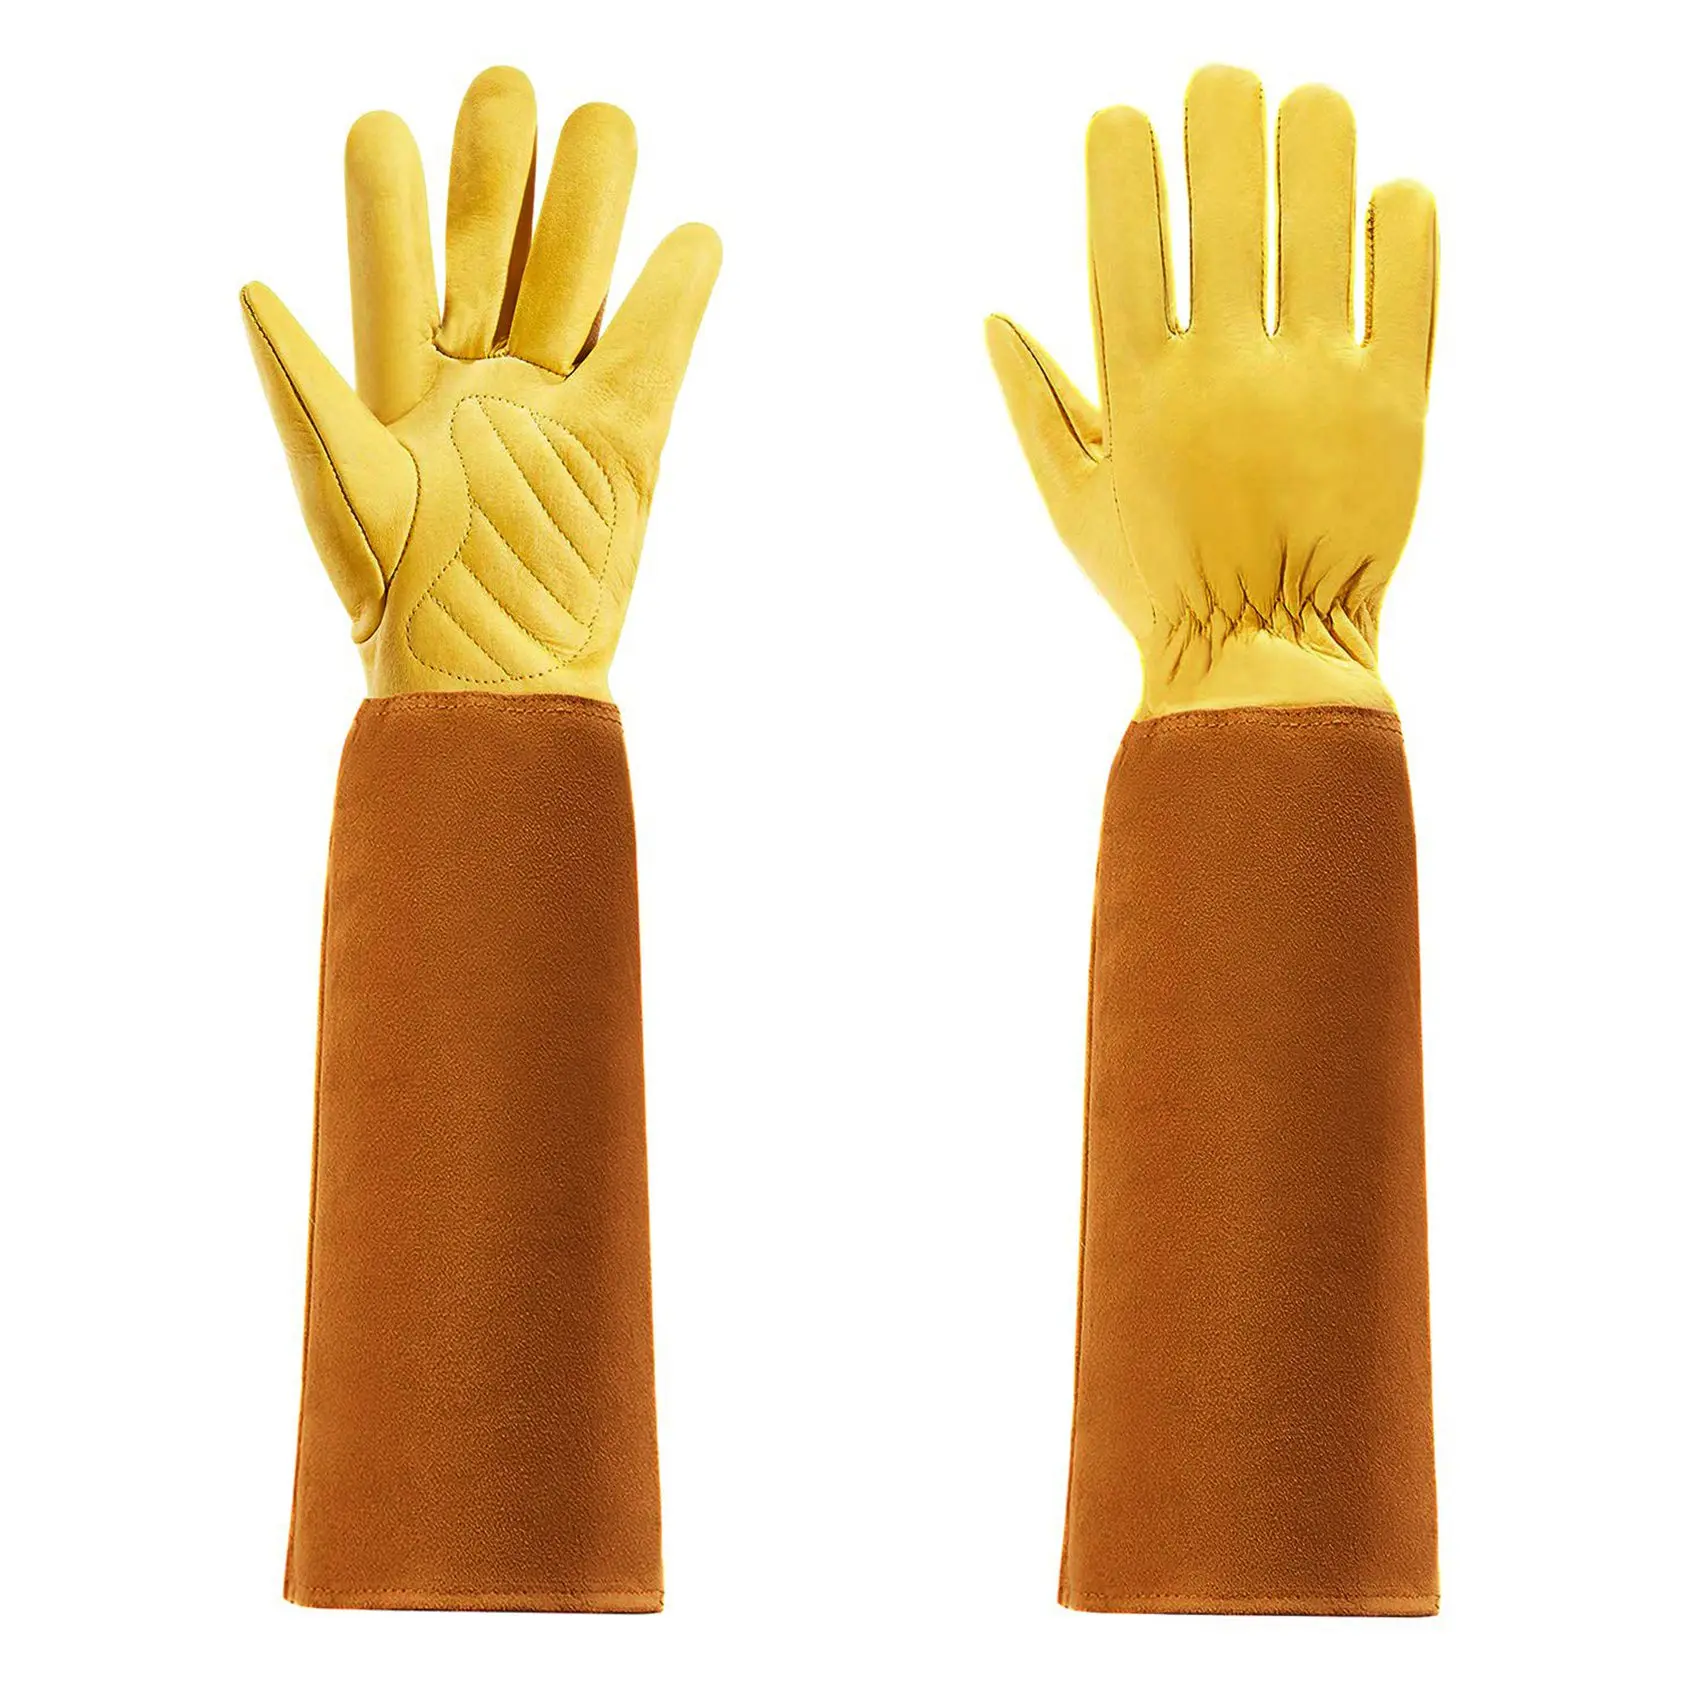 

Gardening Gloves for Women and Men Thron Proof Rose Pruning Cow Leather Gloves with Long Forearm Protection Gauntlet-L